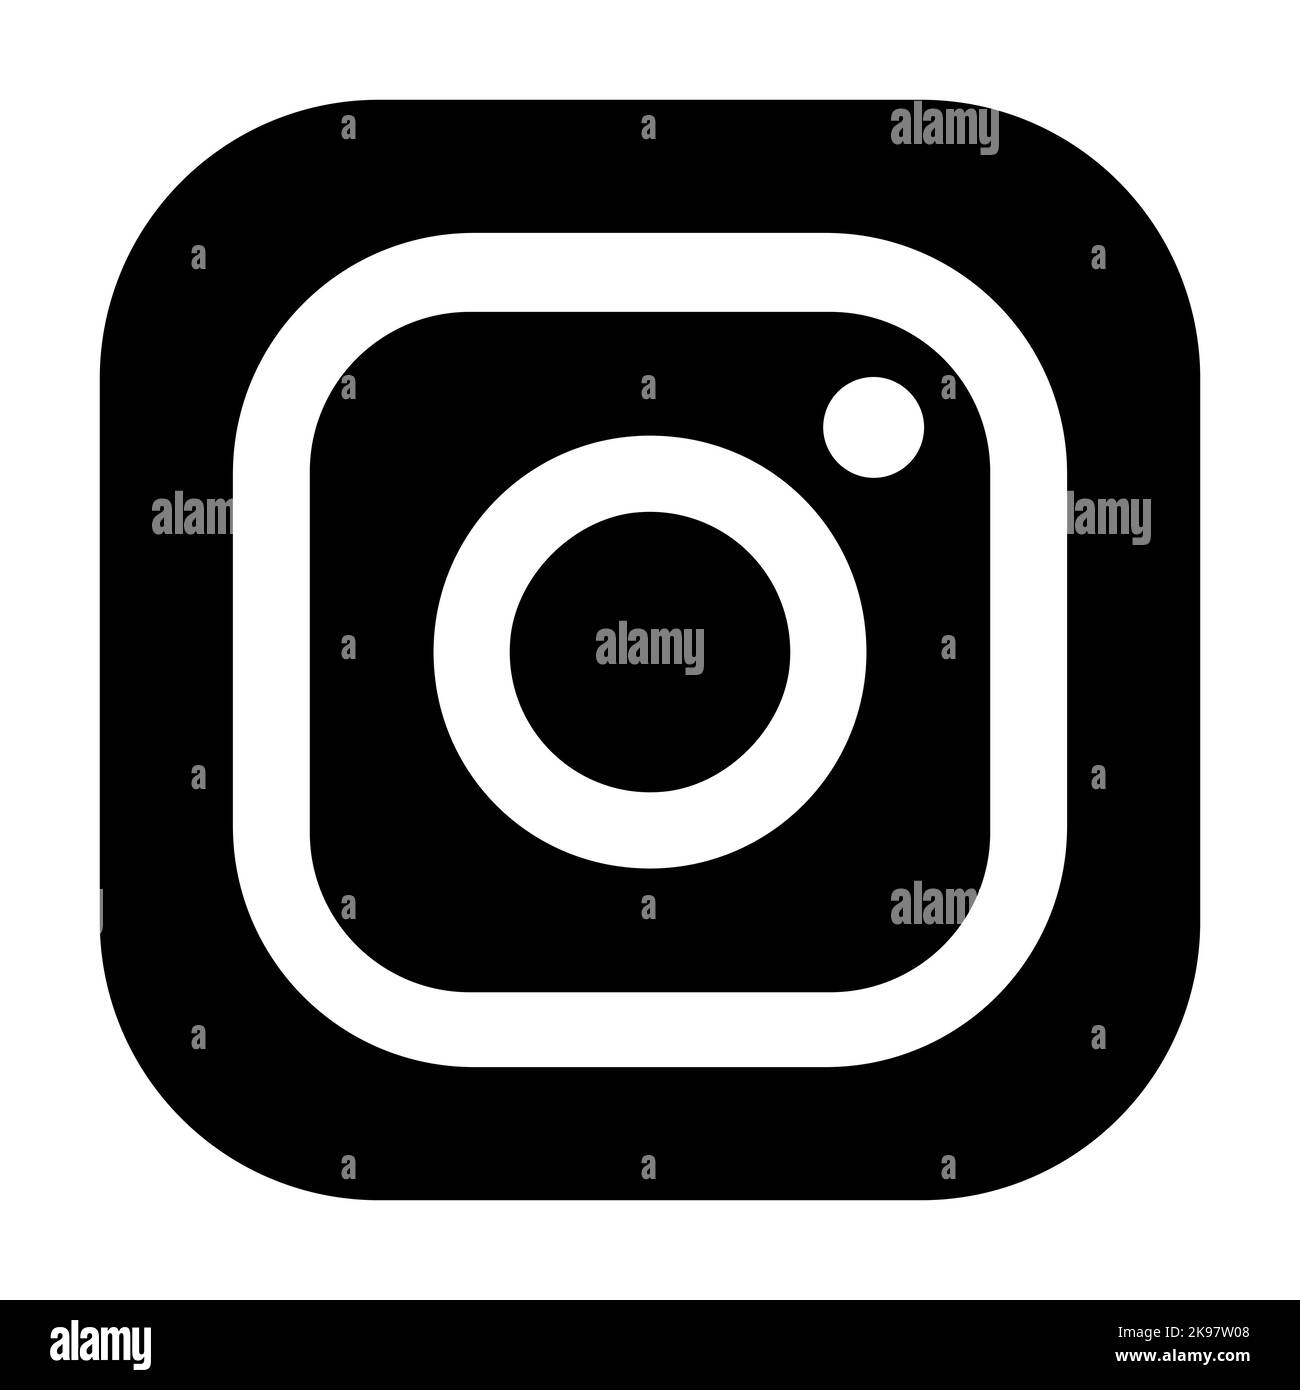 Instagram logo camera icon. Vector editorial illustration isolated on white background Stock Vector